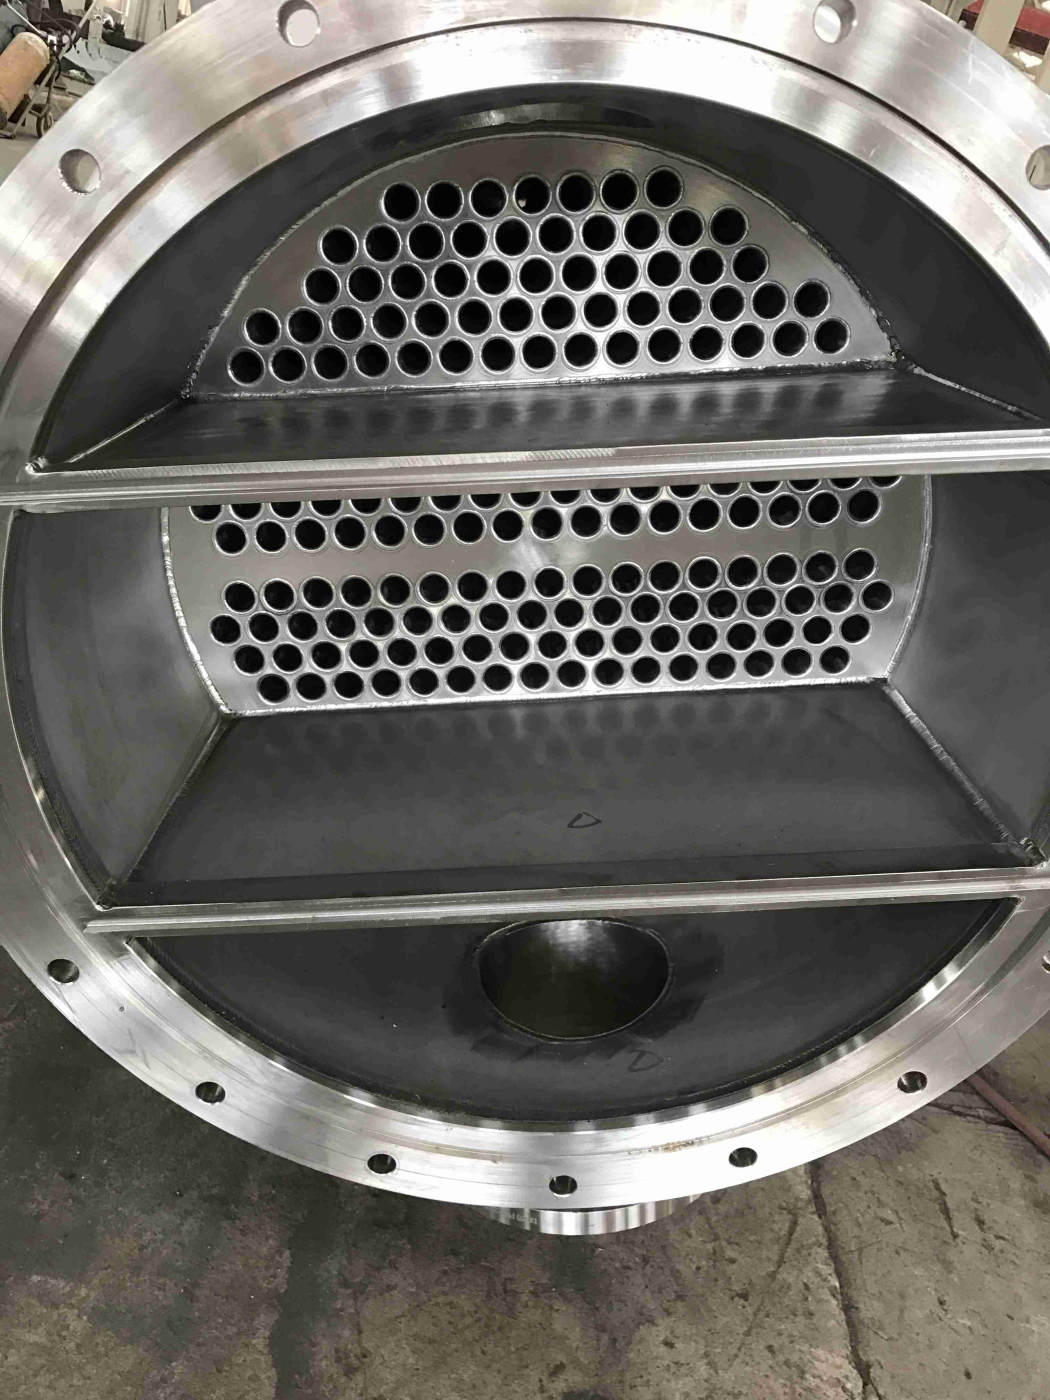 shell and tube heat exchangers